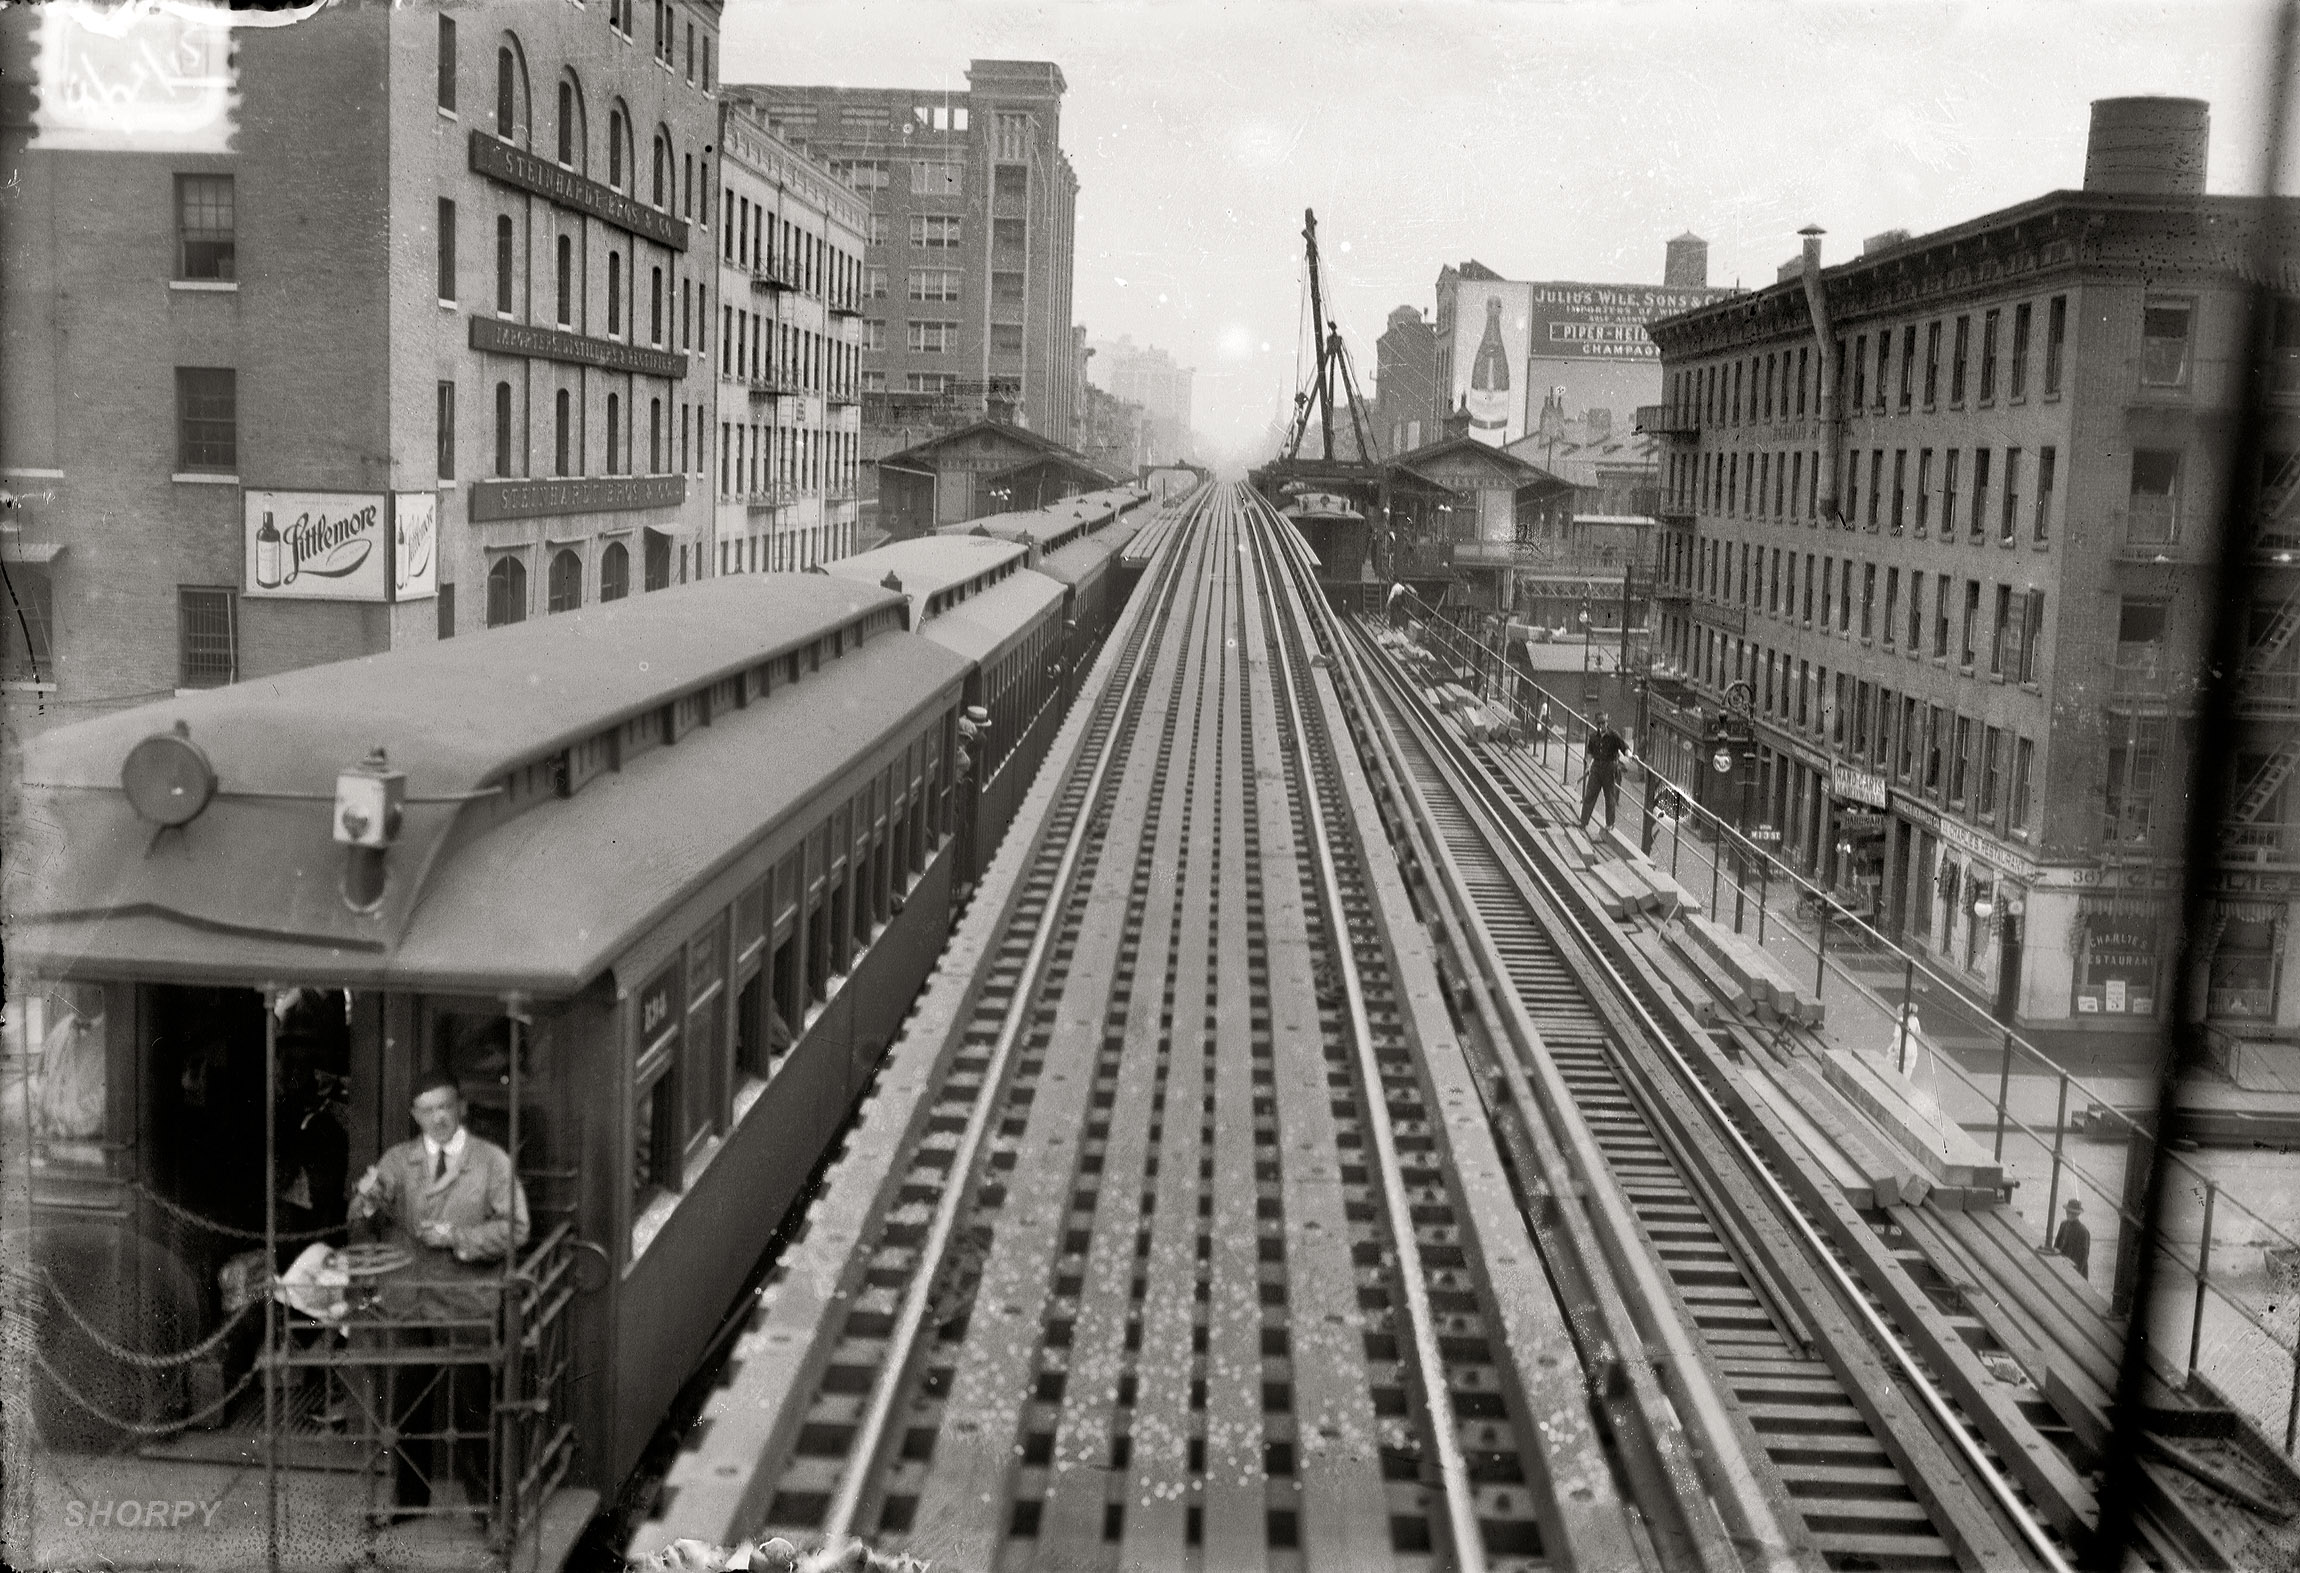 August 21, 1915. "Express track, 9th Avenue 'L'." Construction along the Ninth Avenue elevated tracks at West 13th Street in New York. On the corner: Charlie's Restaurant. 5x7 glass negative by George Grantham Bain. View full size.